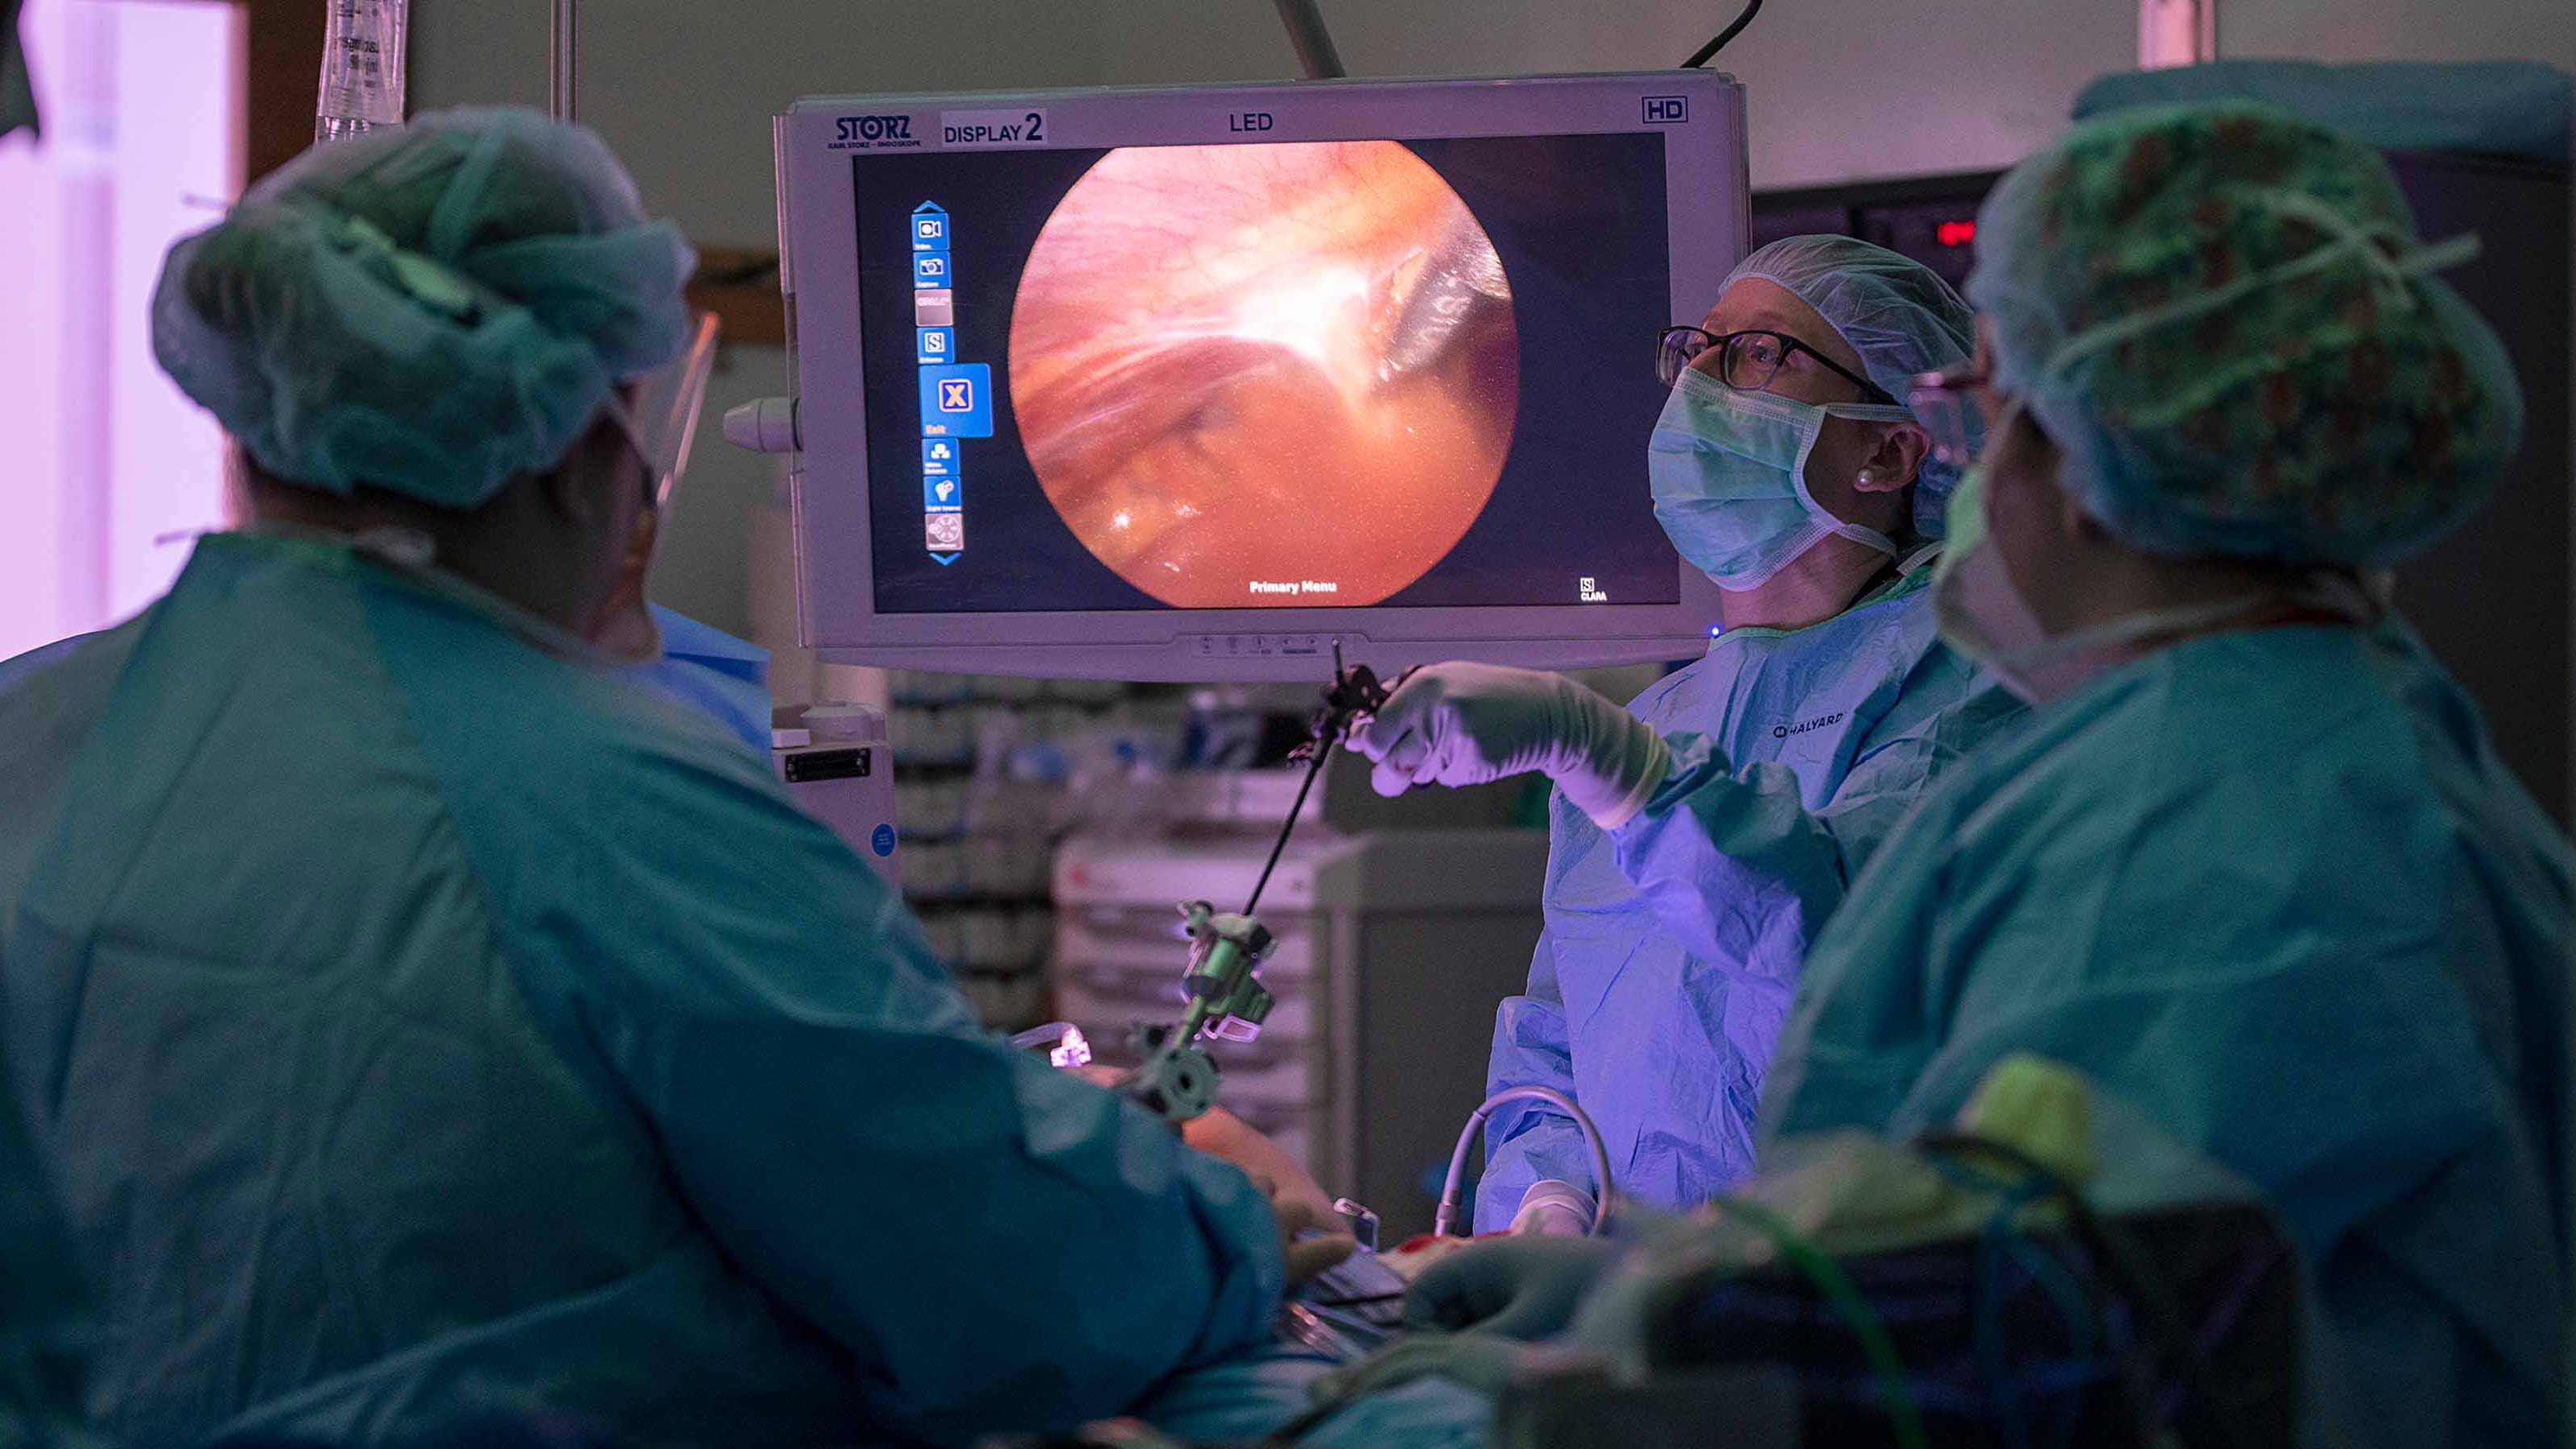 Advanced robotic surgery giving pancreatic cancer patients 'the gift of time'